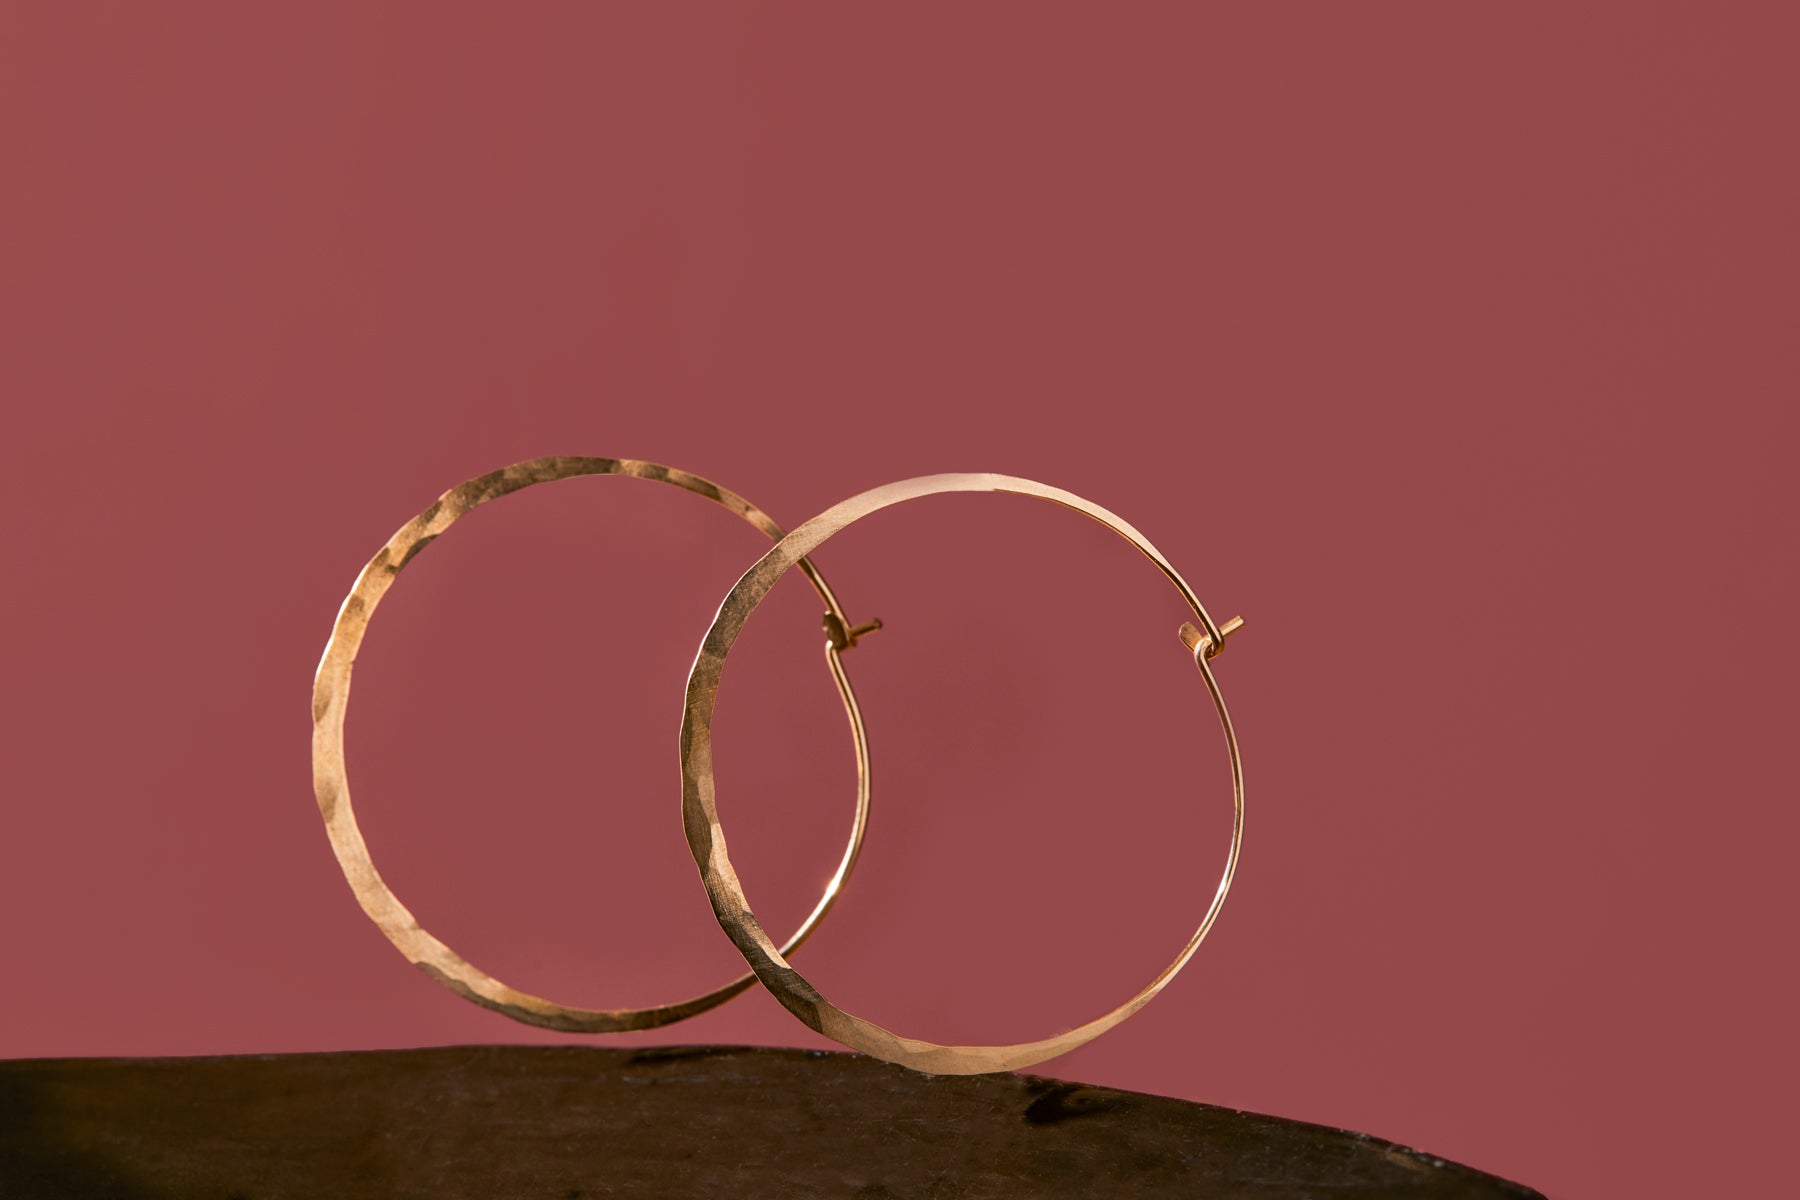 The Mazzo Hoop Earrings from the Sorda Collection are bold, yet simple modern hoops that are certain to make a statement.